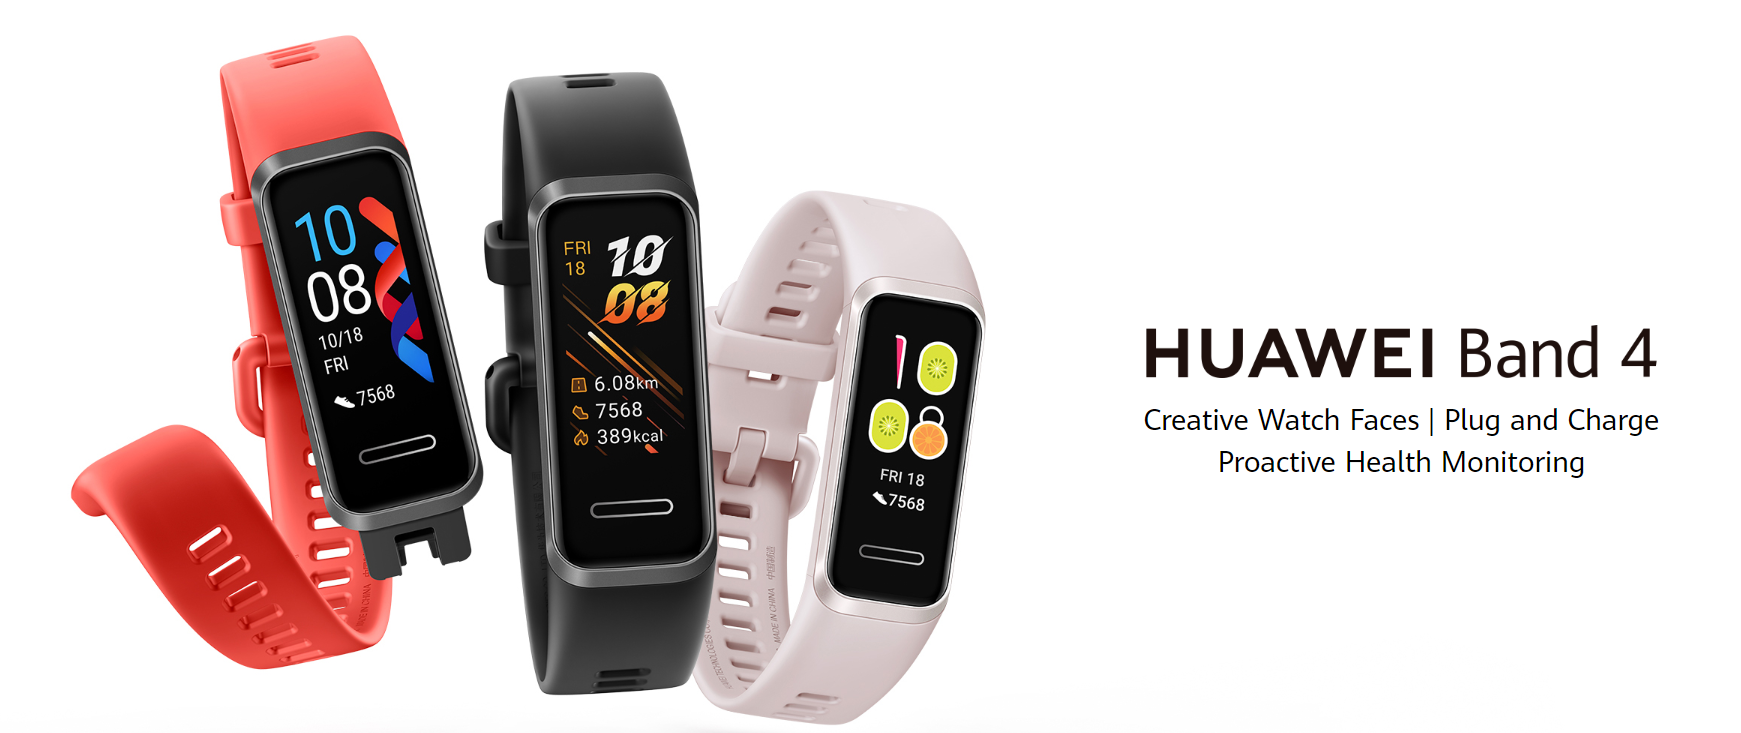 Huawei Band 4 featured